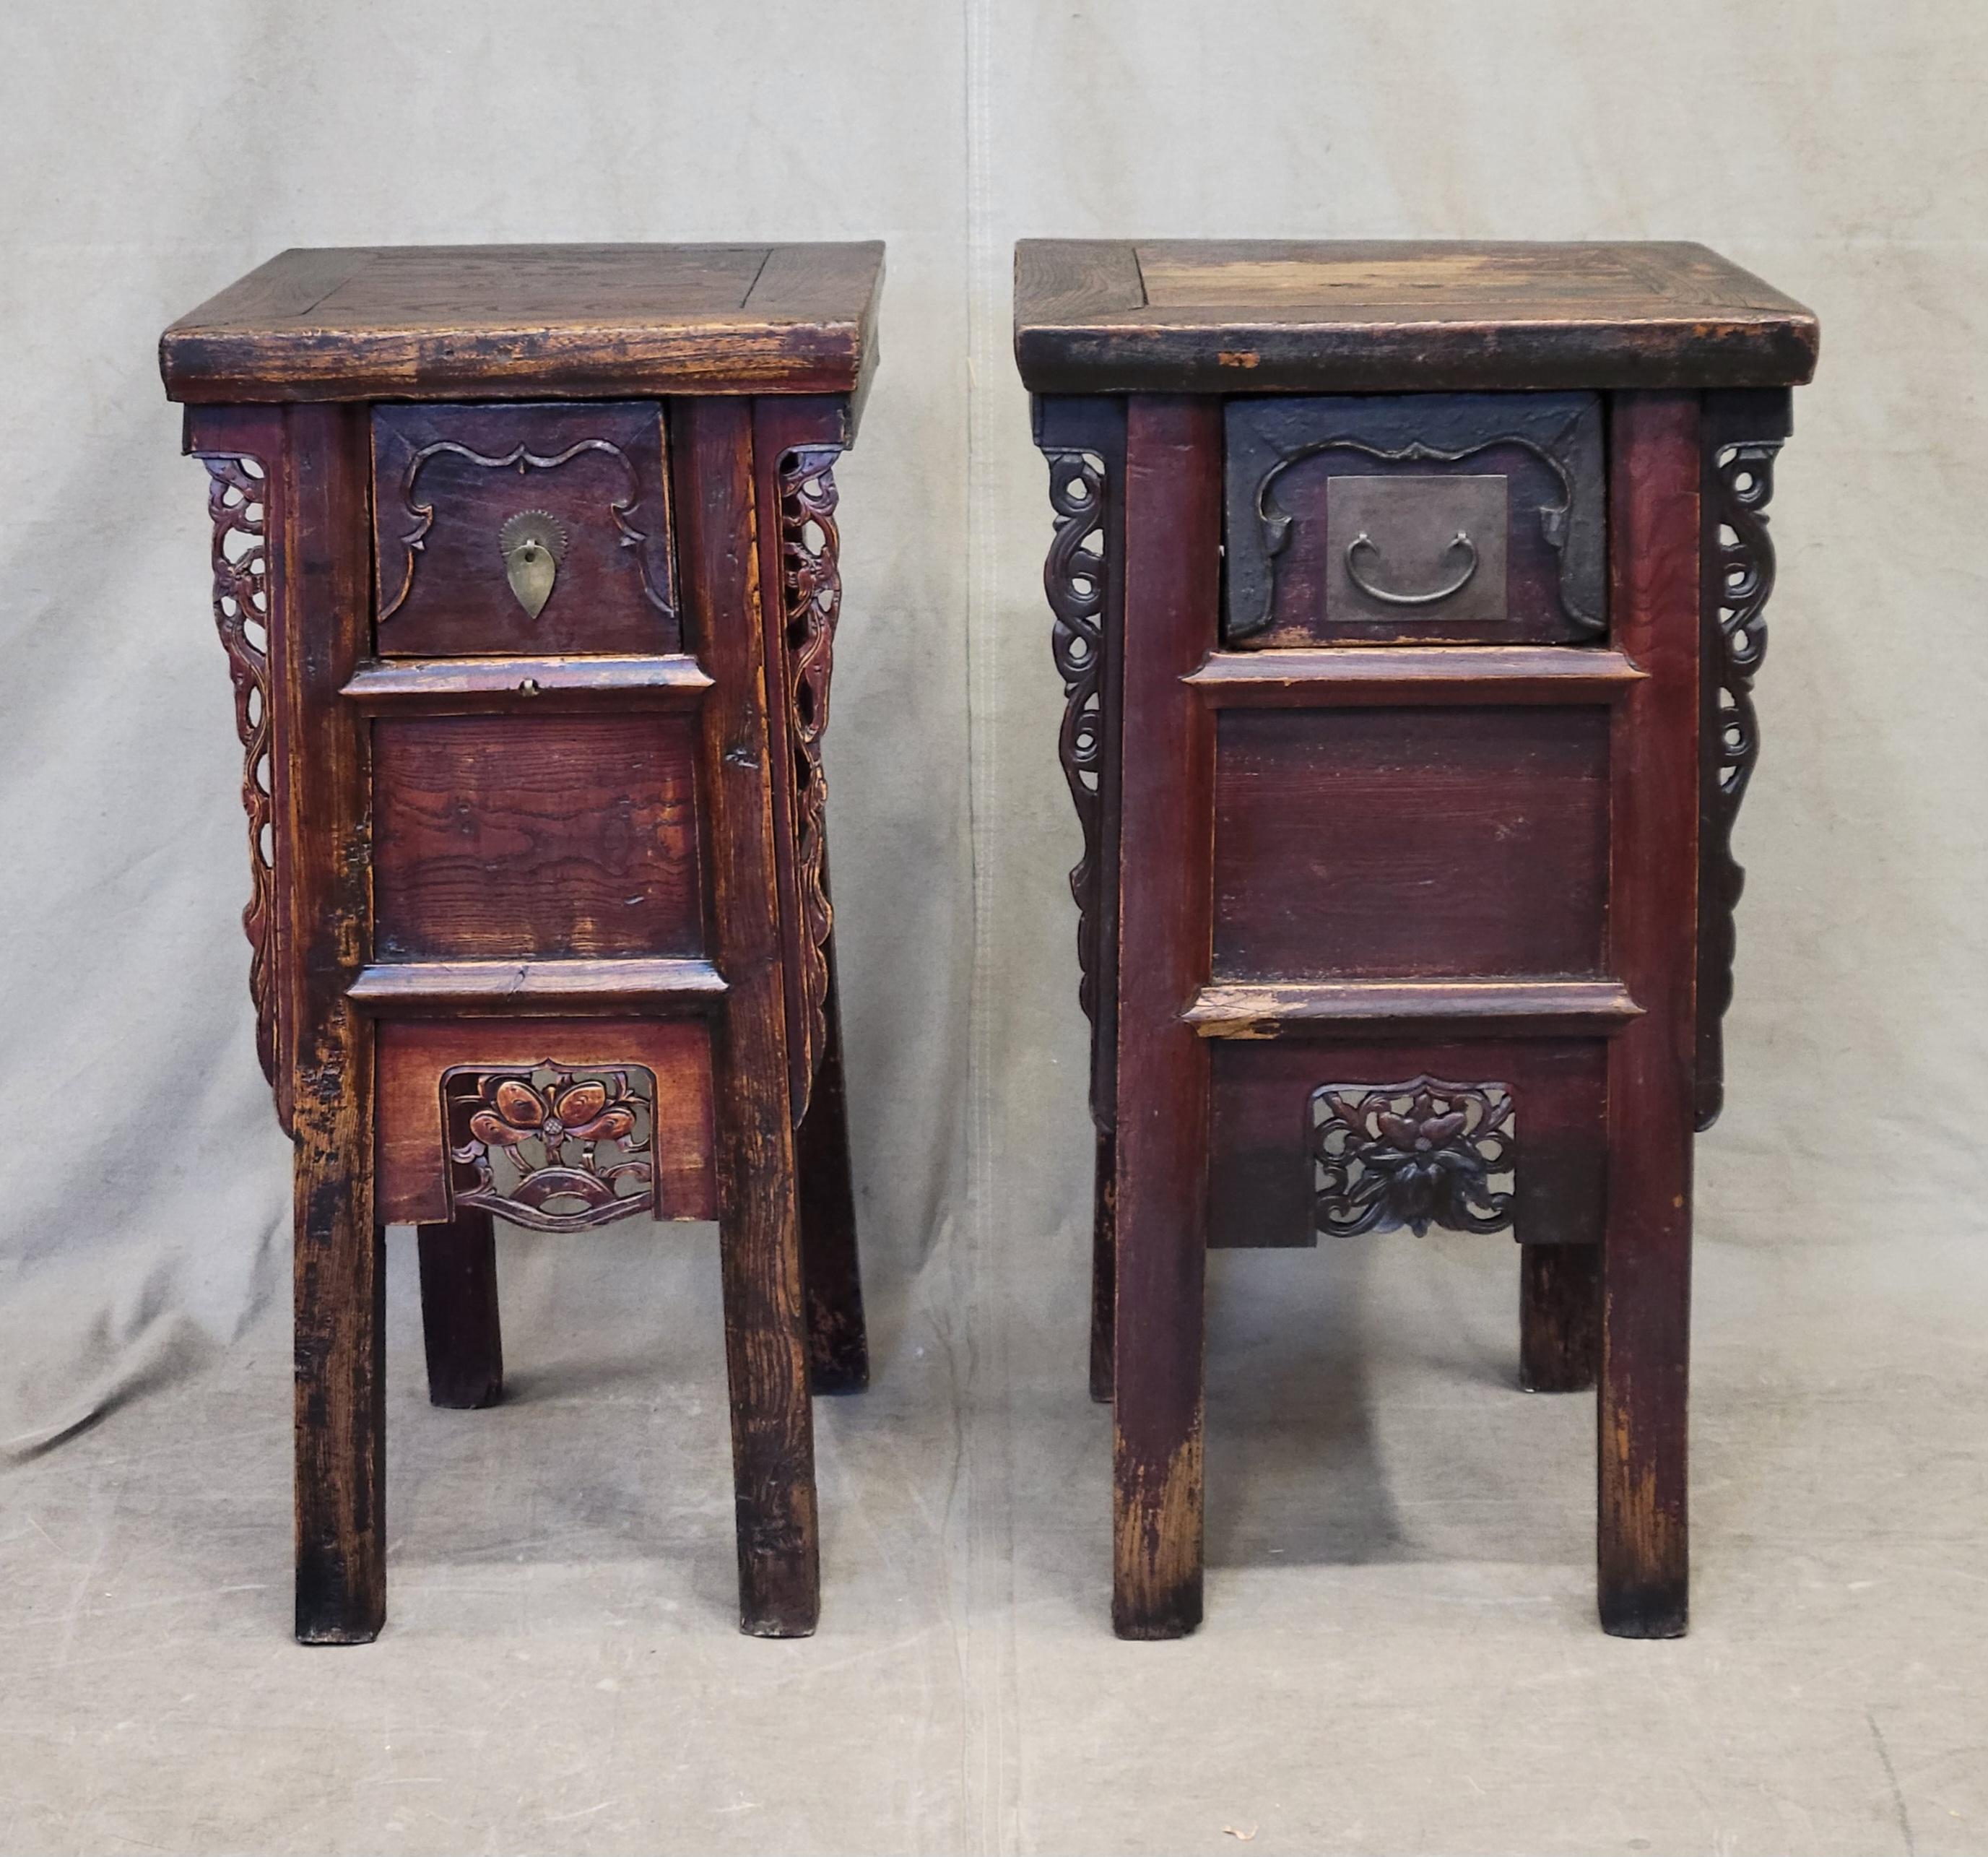 A stunning near pair (not a perfect match but close enough to use together) of antique Chinese elm side tables. This form is often called an alter table and is typically larger. This is a smaller version which is unusual and makes this near pair